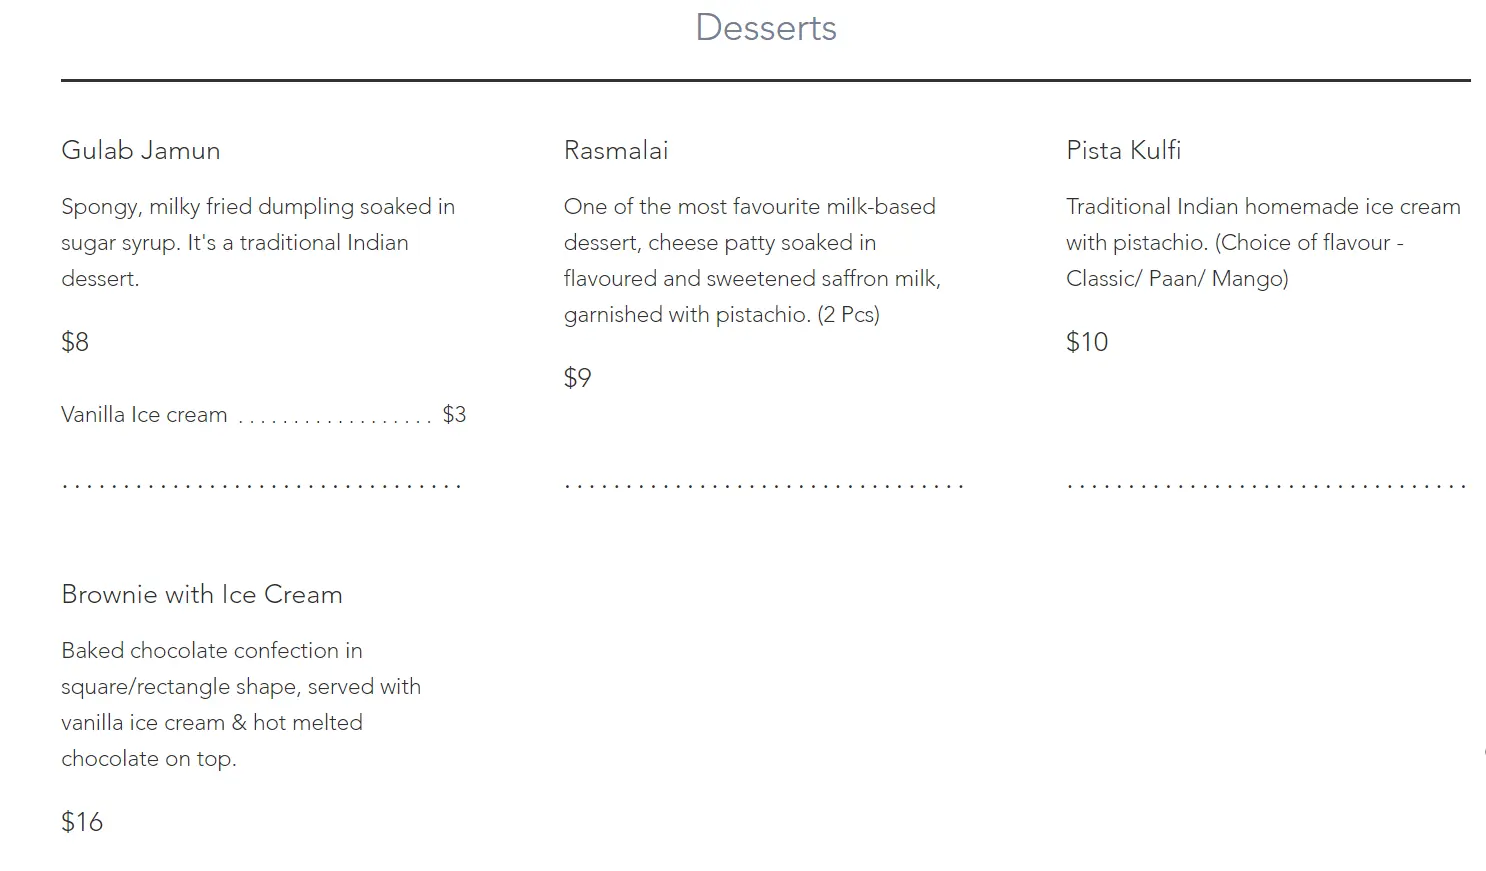 ANGLO INDIAN DESSERTS MENU PRICES